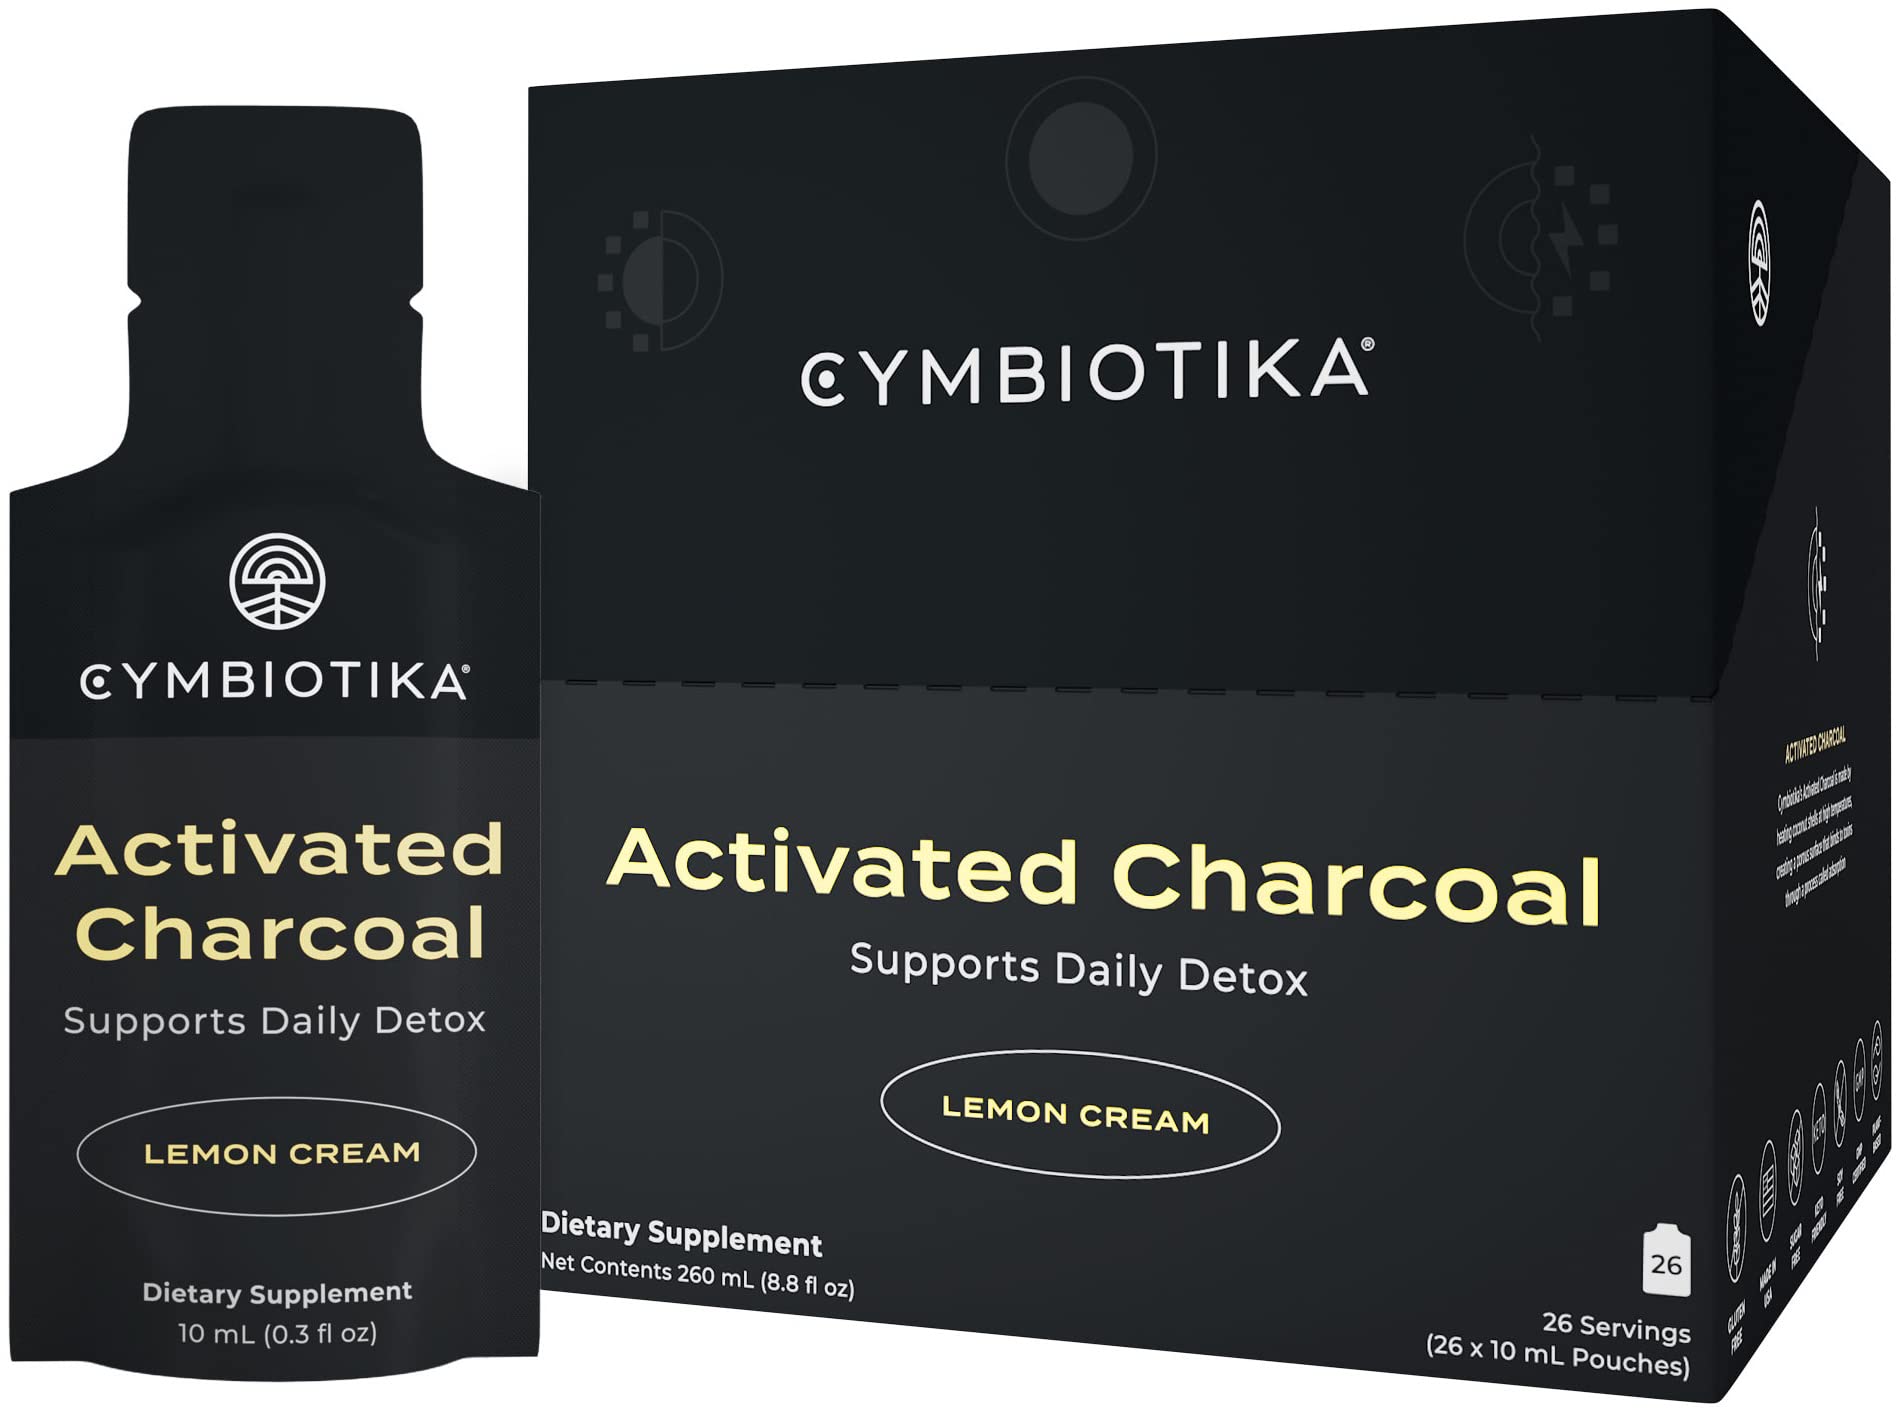 CYMBIOTIKA Activated Charcoal Liquid Supplement with Vitamin E, Gut Health & Digestive Support for Adults, Helps Cleanse, Detox, Support Gas, Bloating, Lemon Cream Flavor, Vegan, 10ml Pouches, 26 Pack